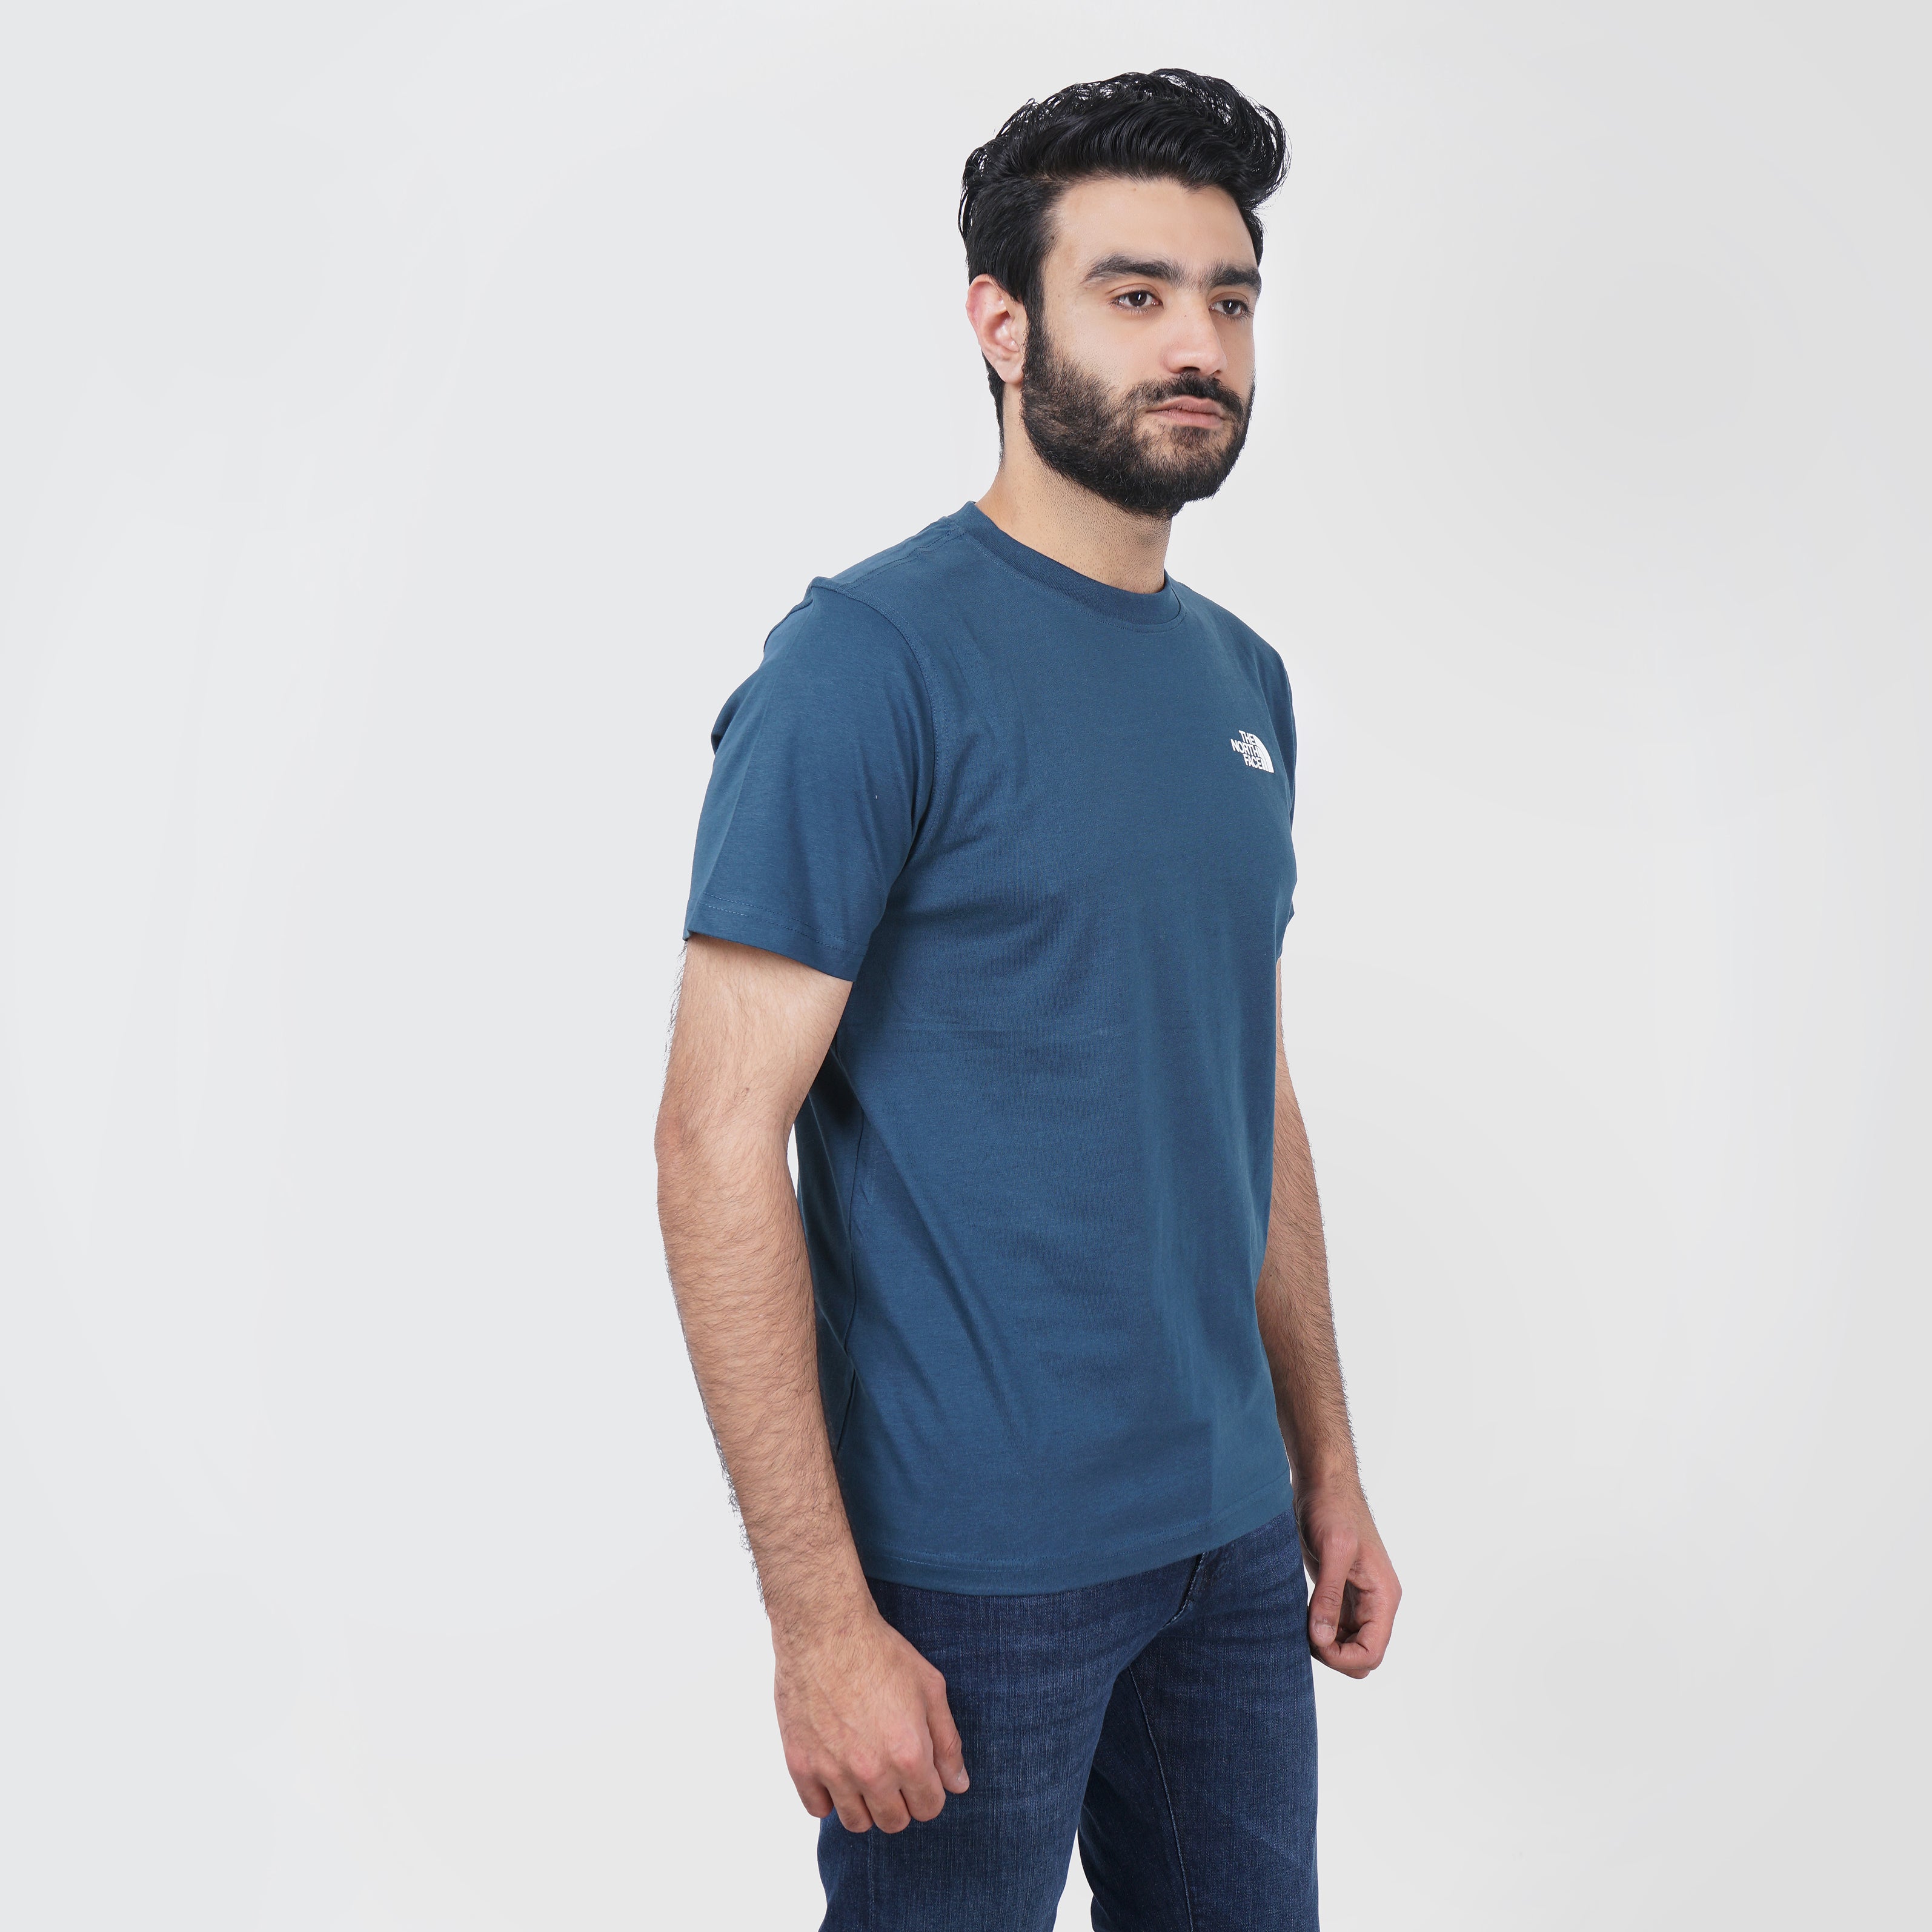 Man in a blue North Face t-shirt and jeans posing against a white background.